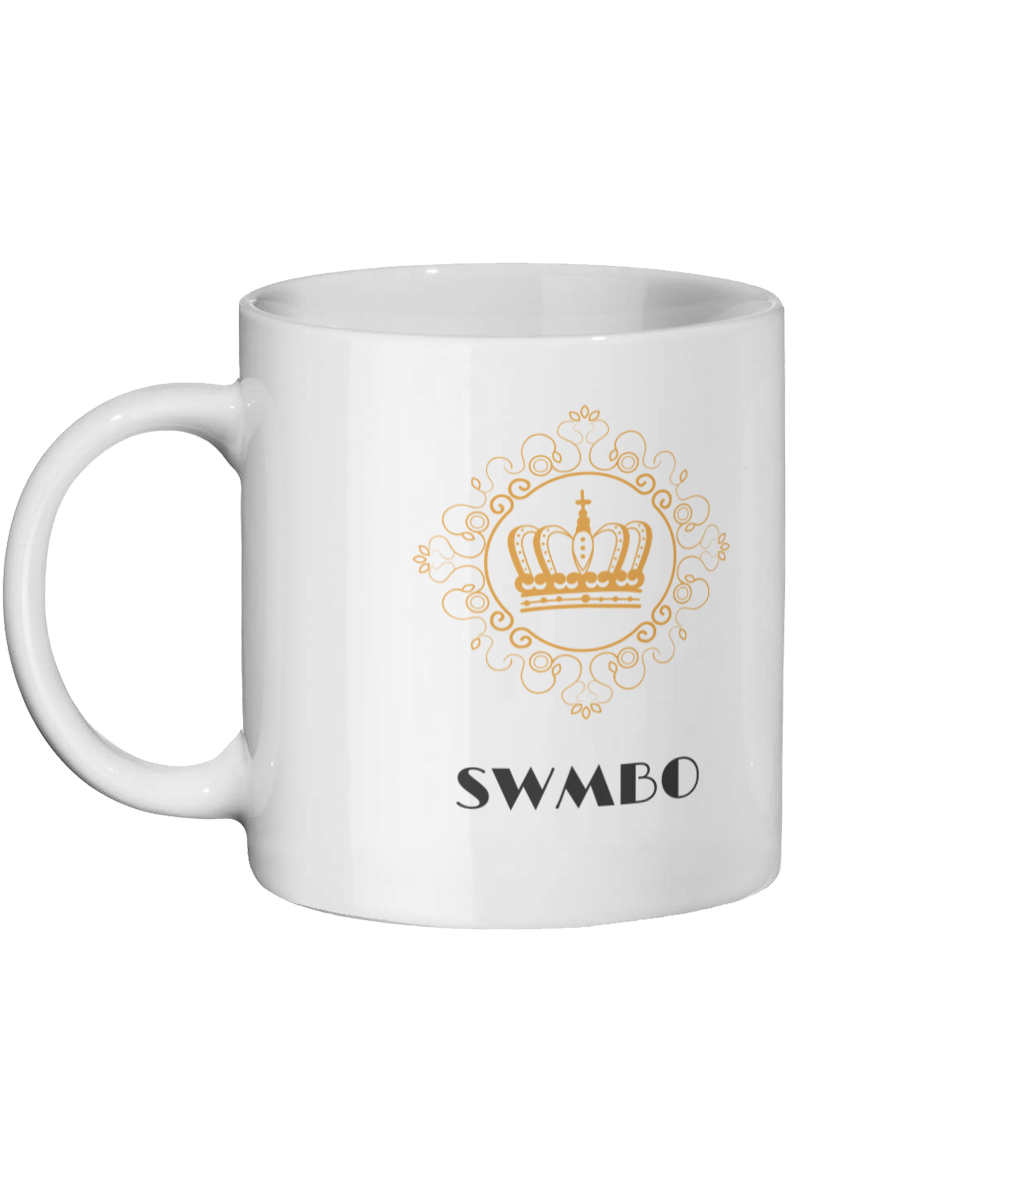 SWMBO She Who Must Be Obeyed Mug Left Side